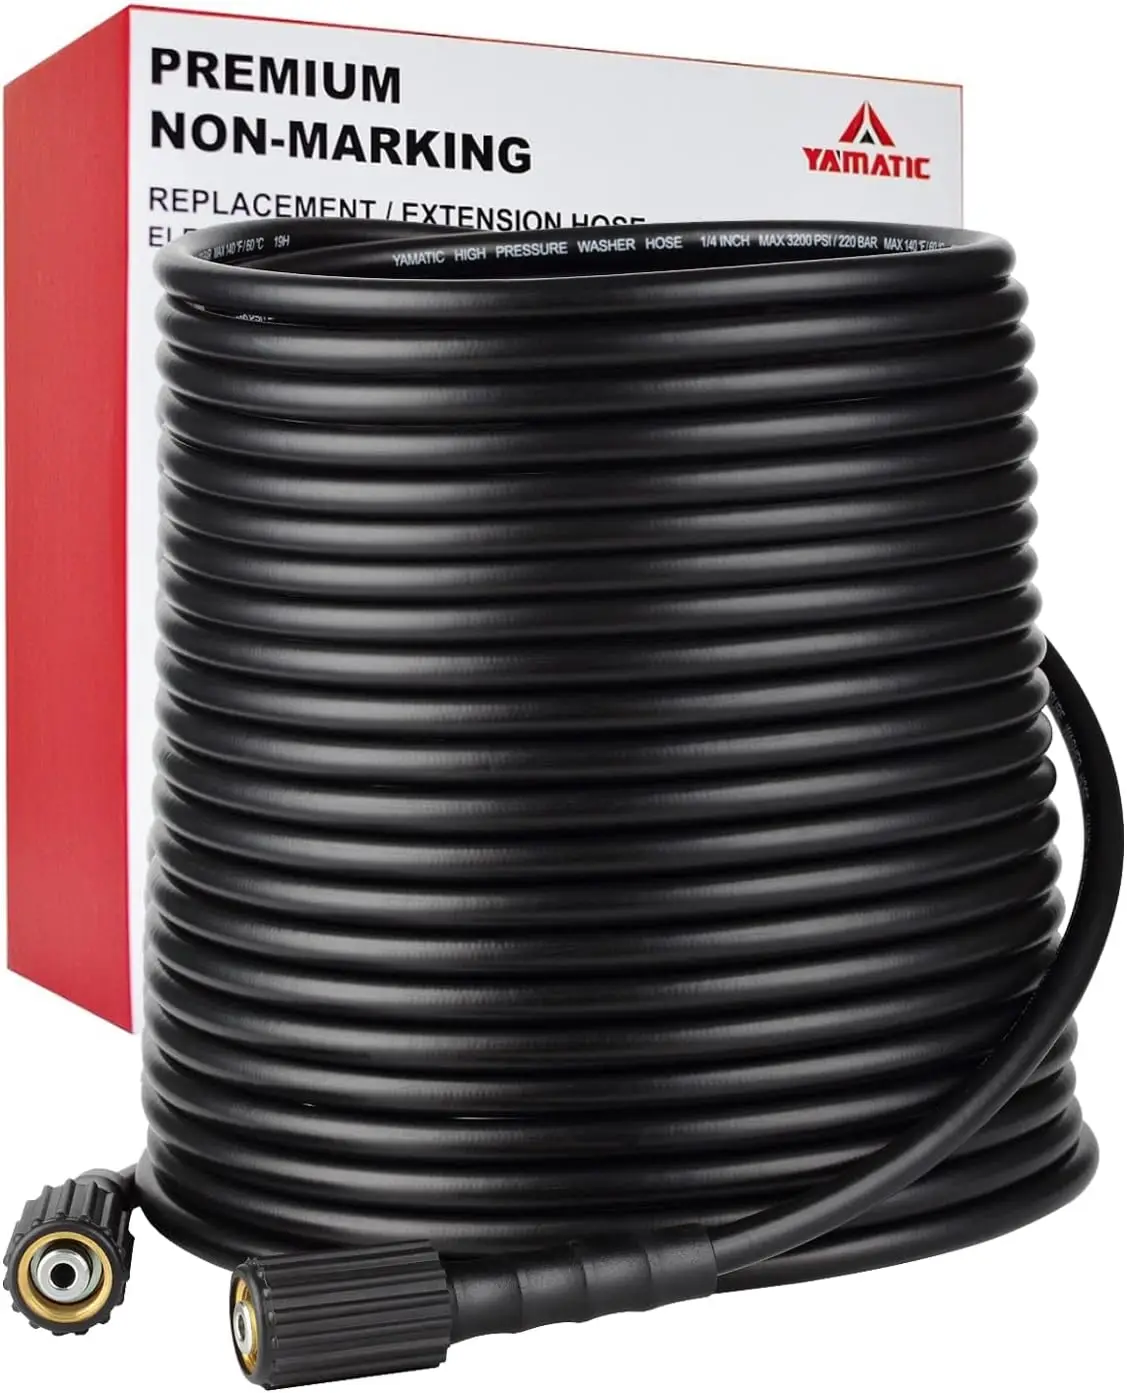 

YAMATIC Pressure Washer Hose 100FT 1/4" Kink Free M22 Brass Fitting Power Washer Hose Replacement High PressureWashers, 3200 PSI